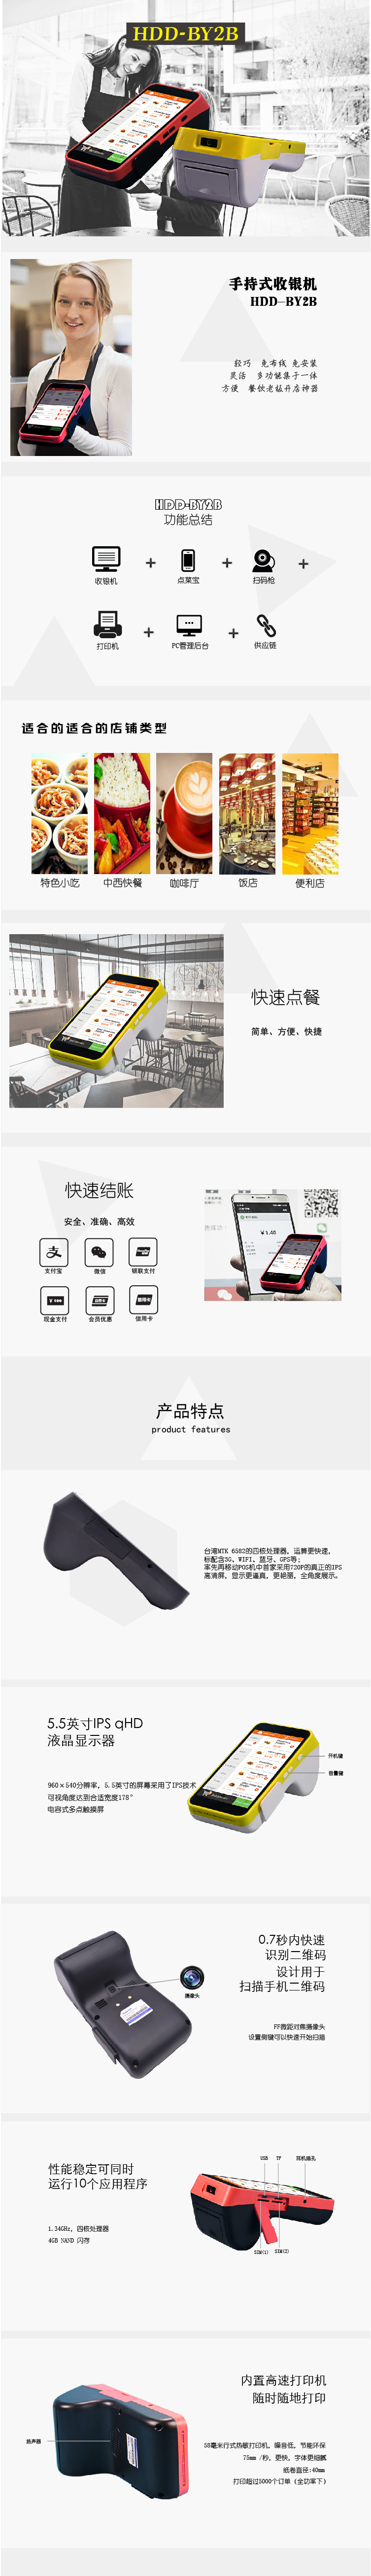 ag真人app下载（/999/product/hdd-by2b-android-pos-thermal-printer.html）